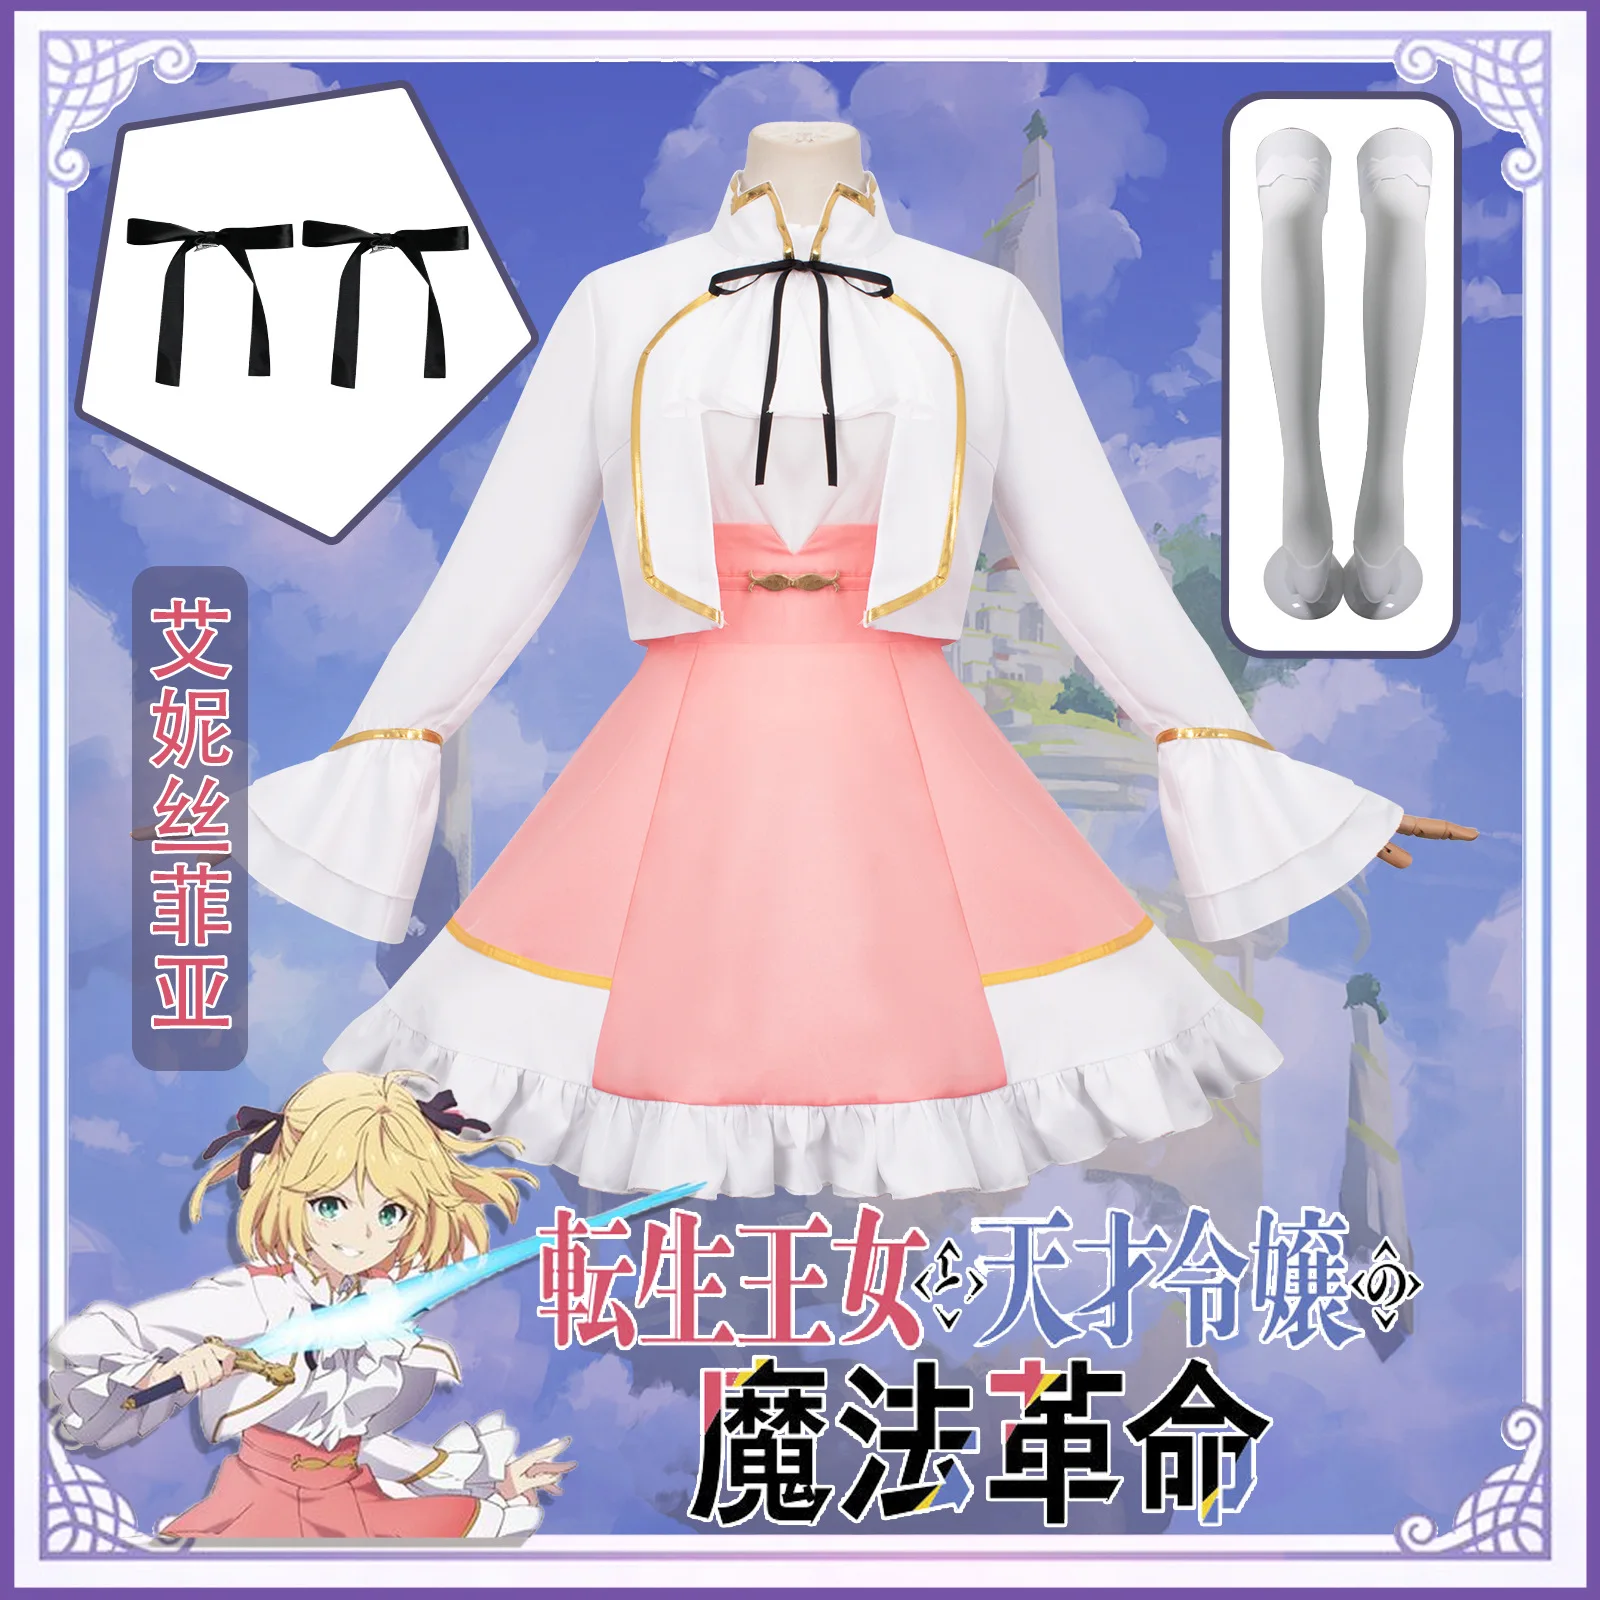 

Reincarnated Princess And The Genius Cosplay Anime Anisphia Wynn Palettia Cospaly Dress Costume Outfits Halloween Party Suit